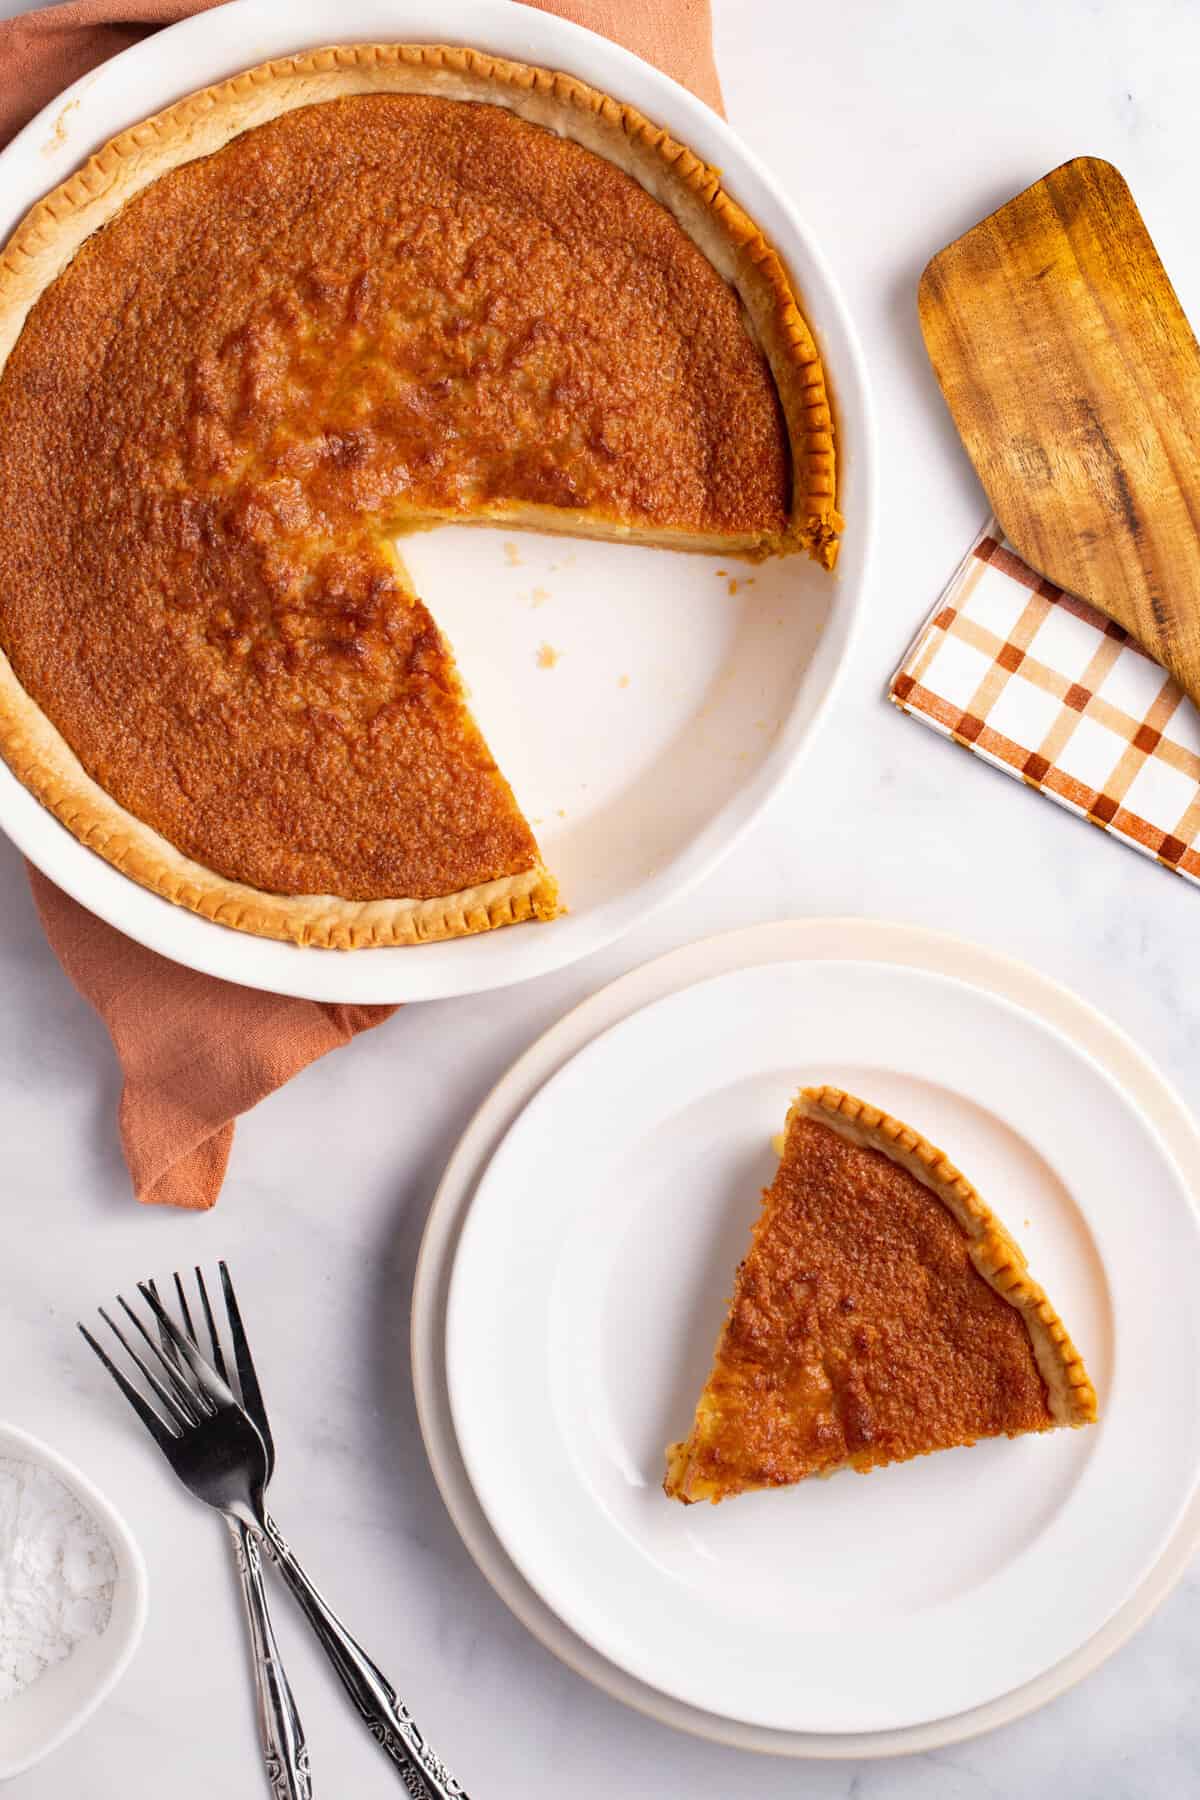 top down image of a slice of chess pie served on a white round plate with silverware to the side and the pie dish with the rest of the chess pie sitting on an orange towel